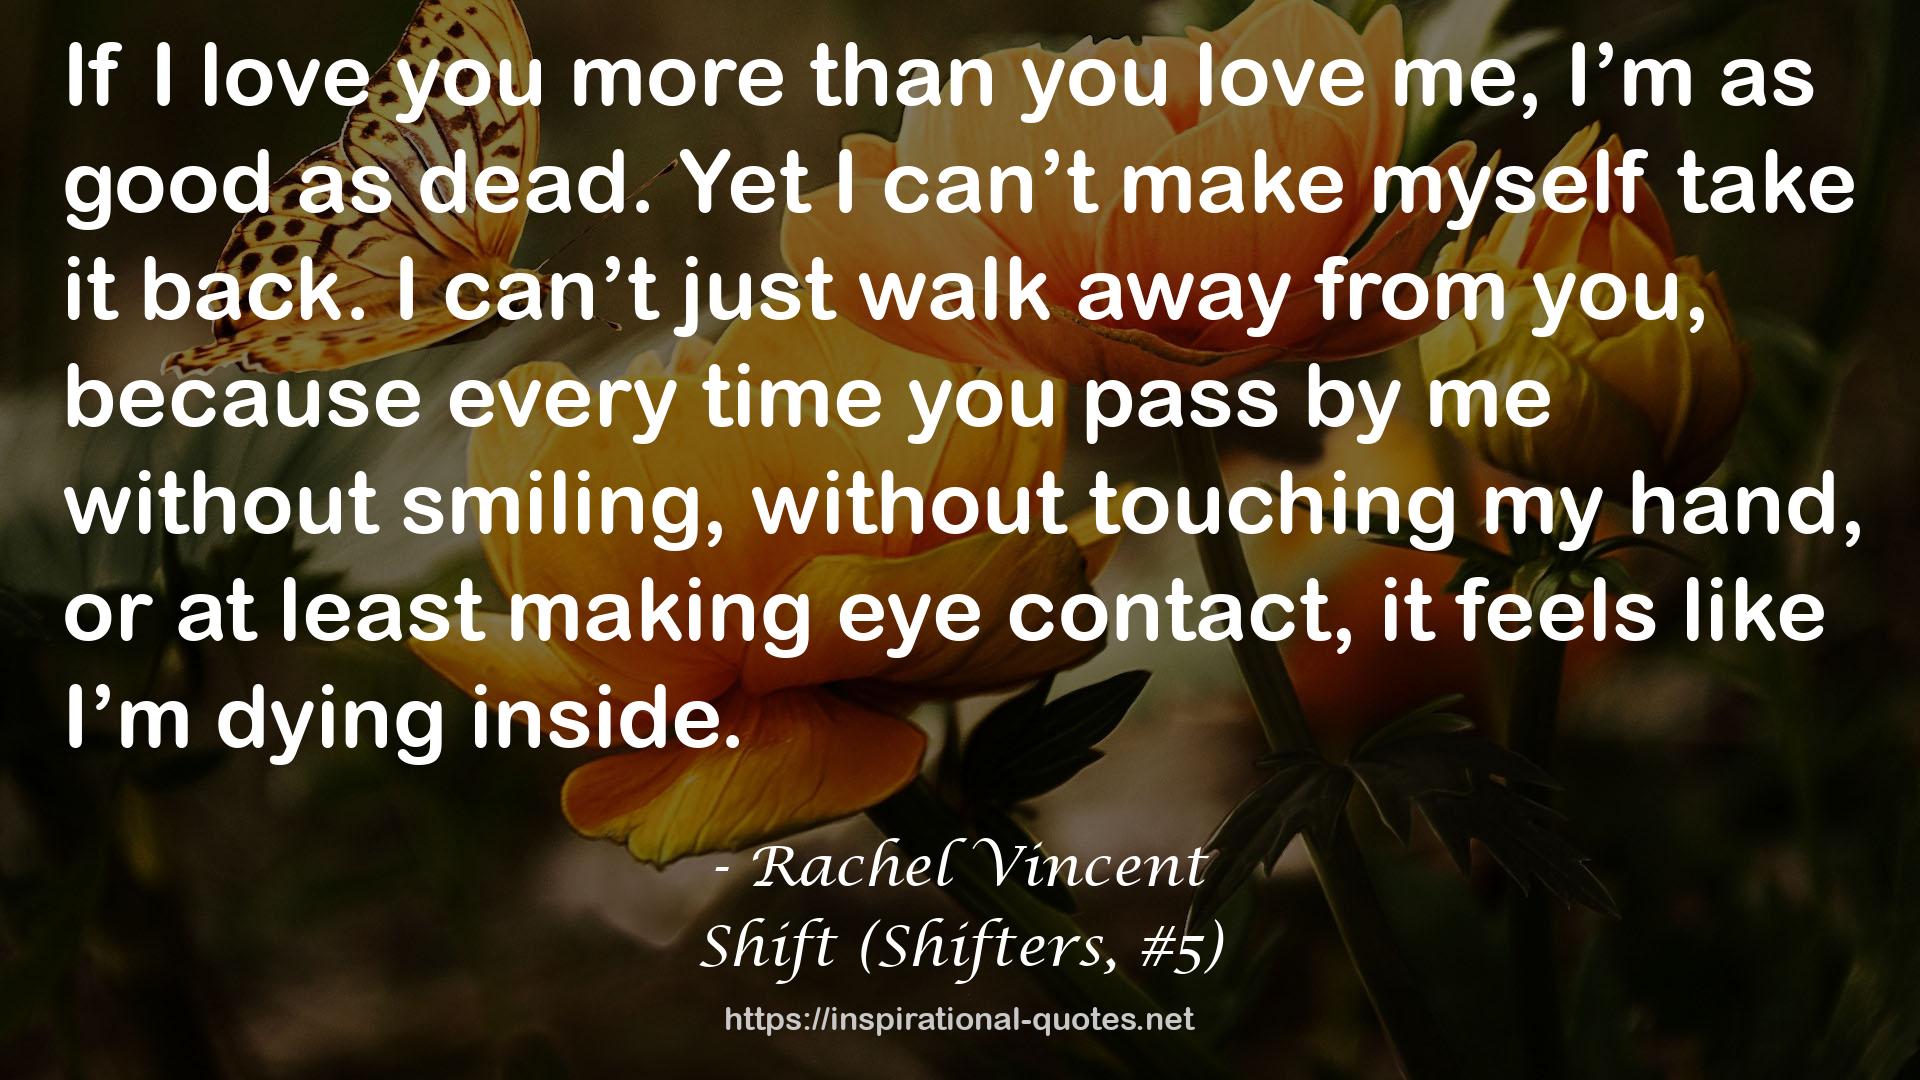 Shift (Shifters, #5) QUOTES